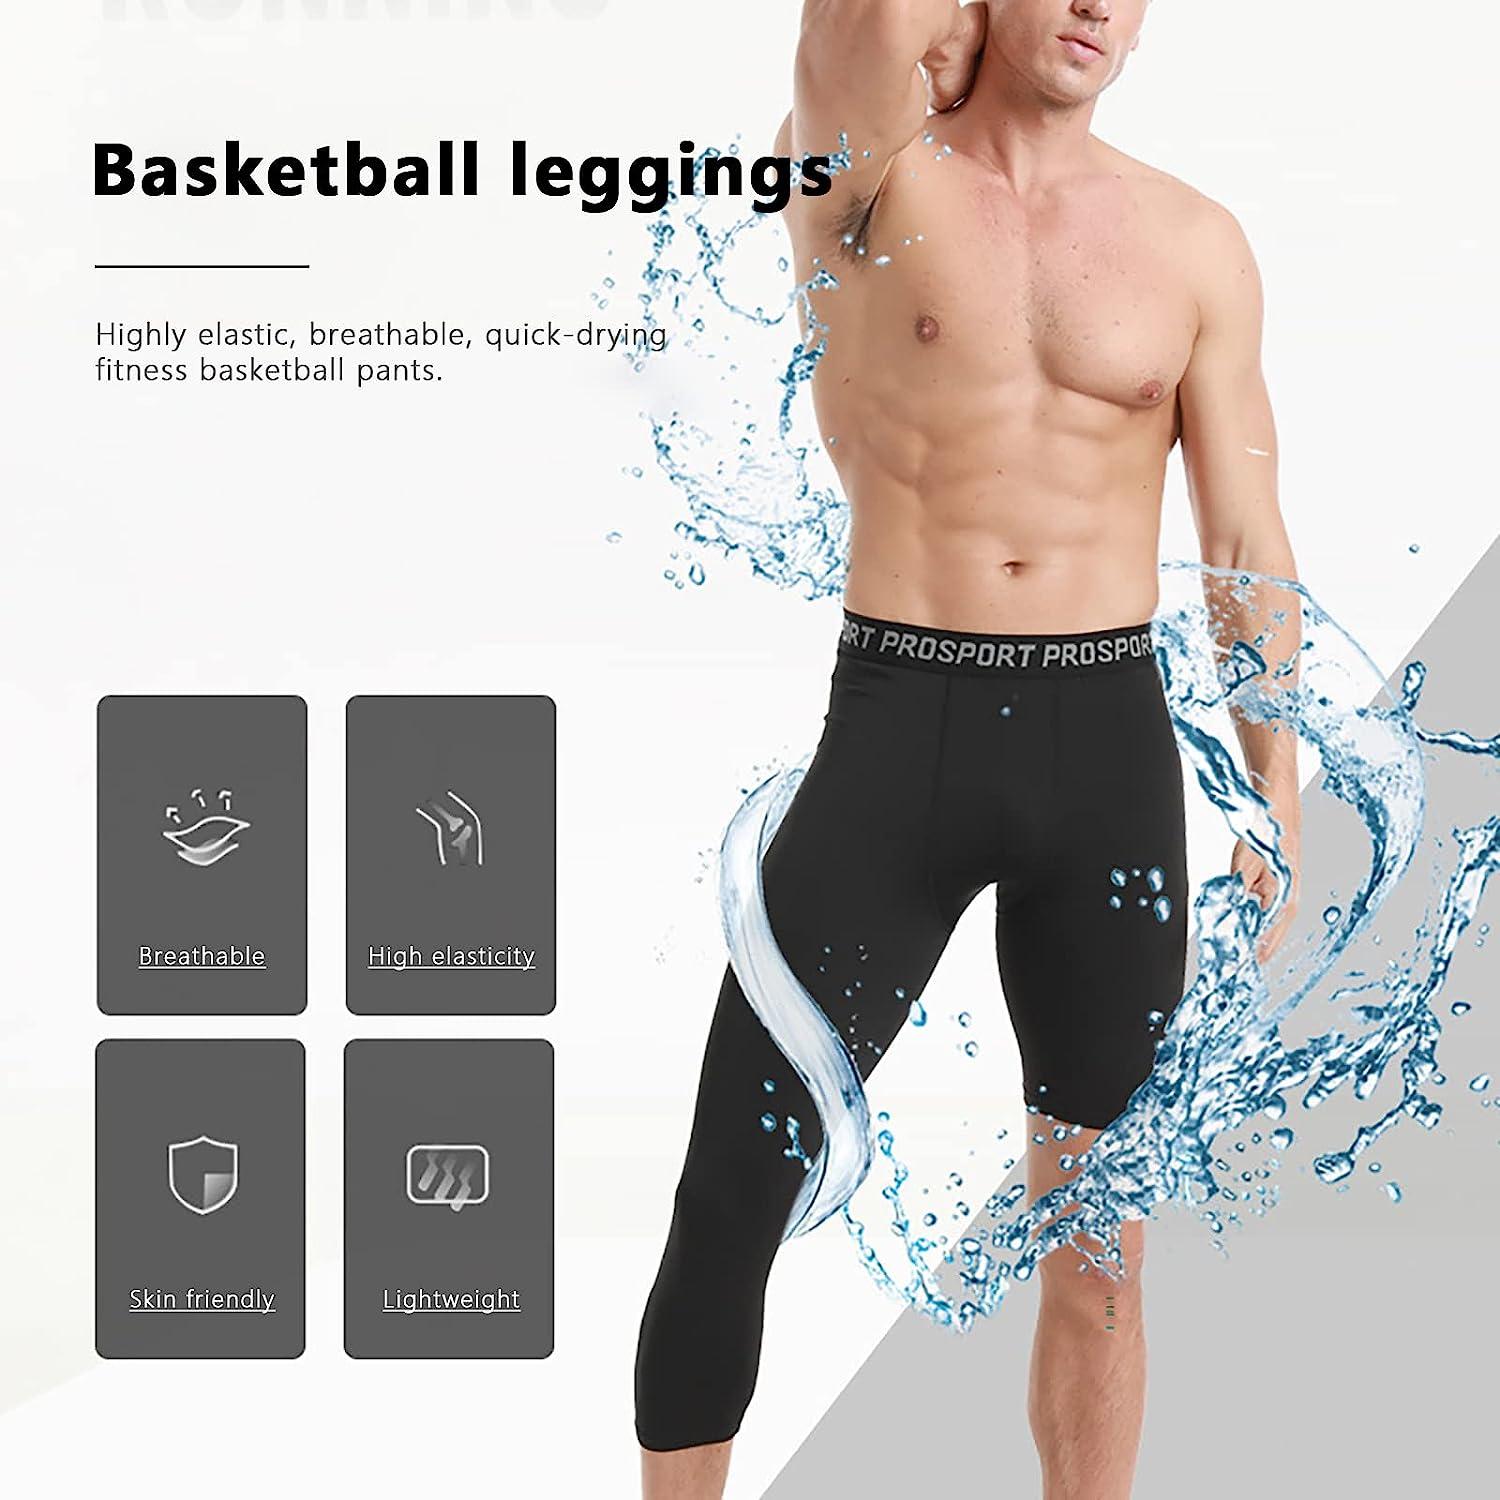 One Leg 3/4 Compression Tights (White) - For Basketball, Football & Lacrosse